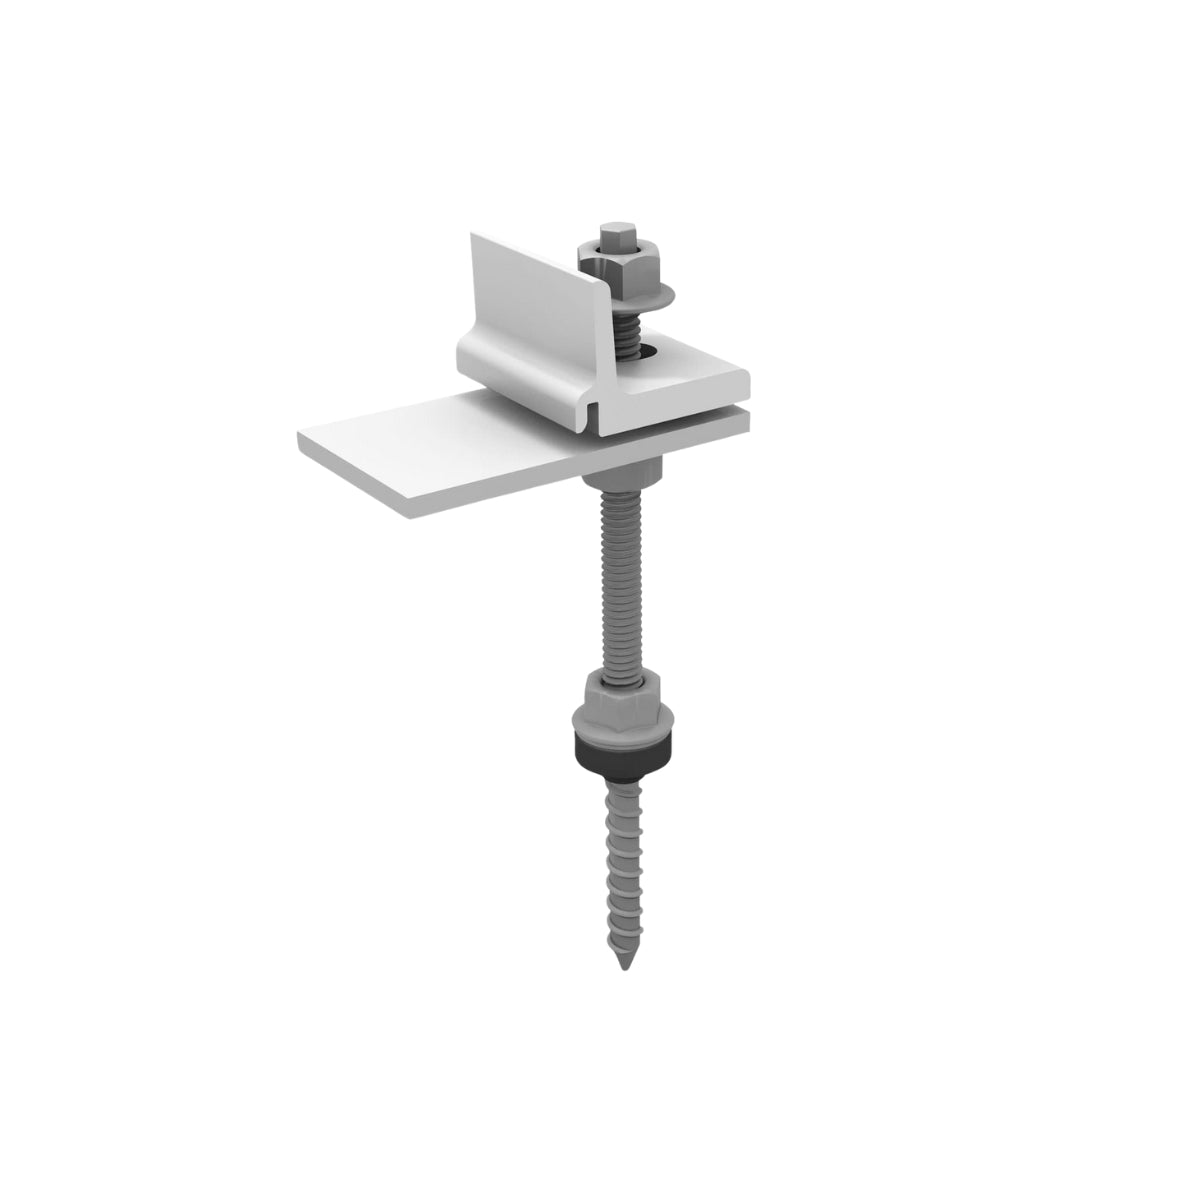 K2-Systems IBR/Corrugated Roof SingleRail 4 Panel Roof Mounting System